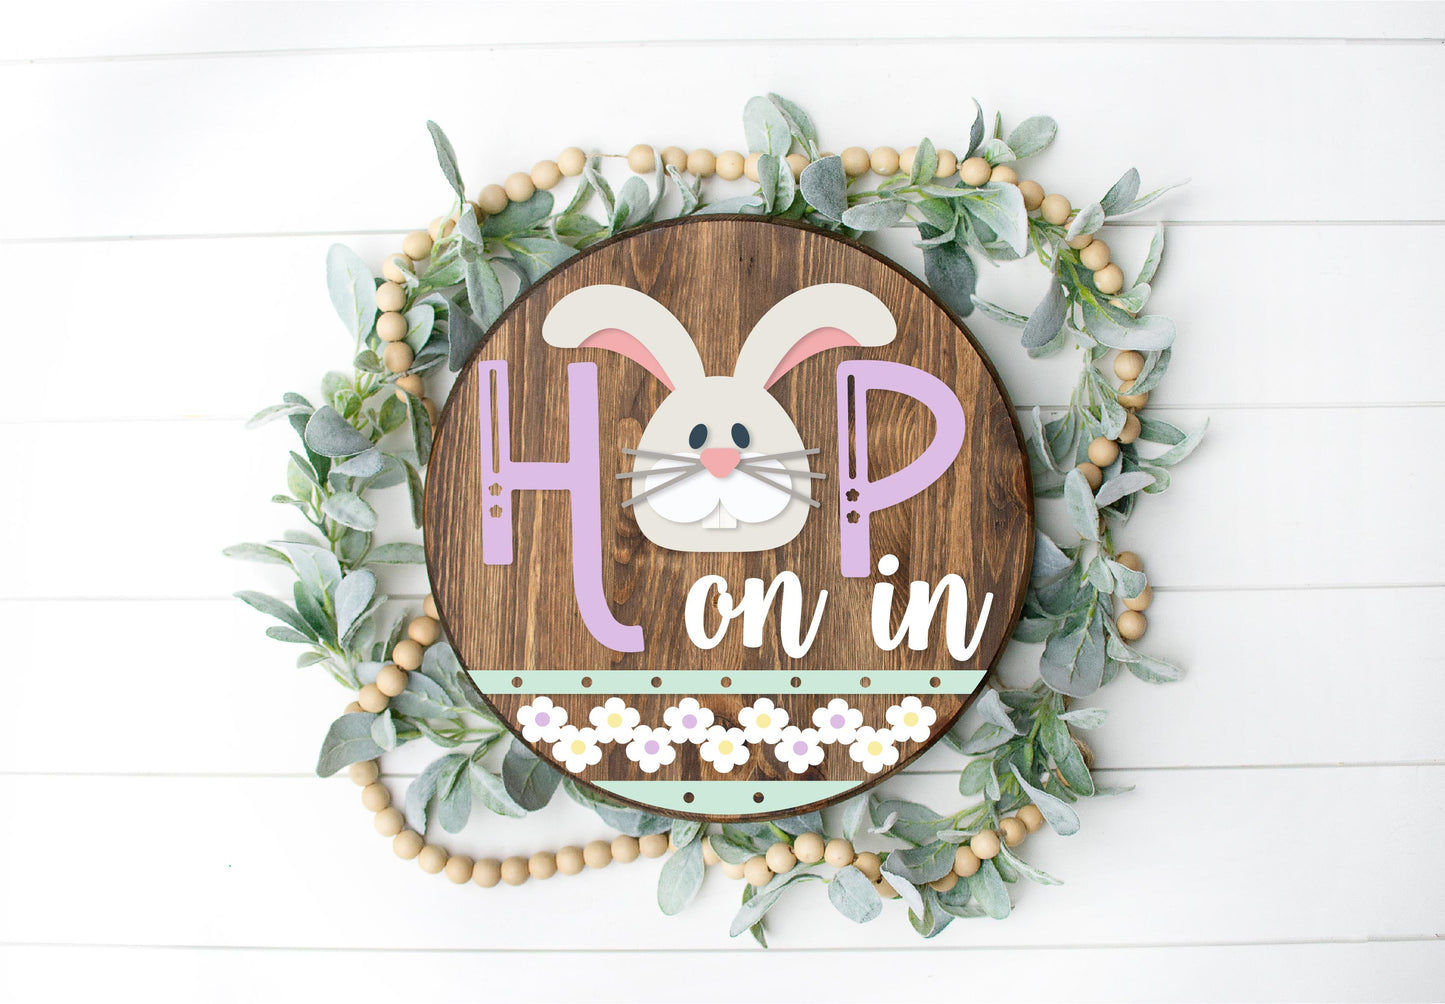 Easter Hop on in sign